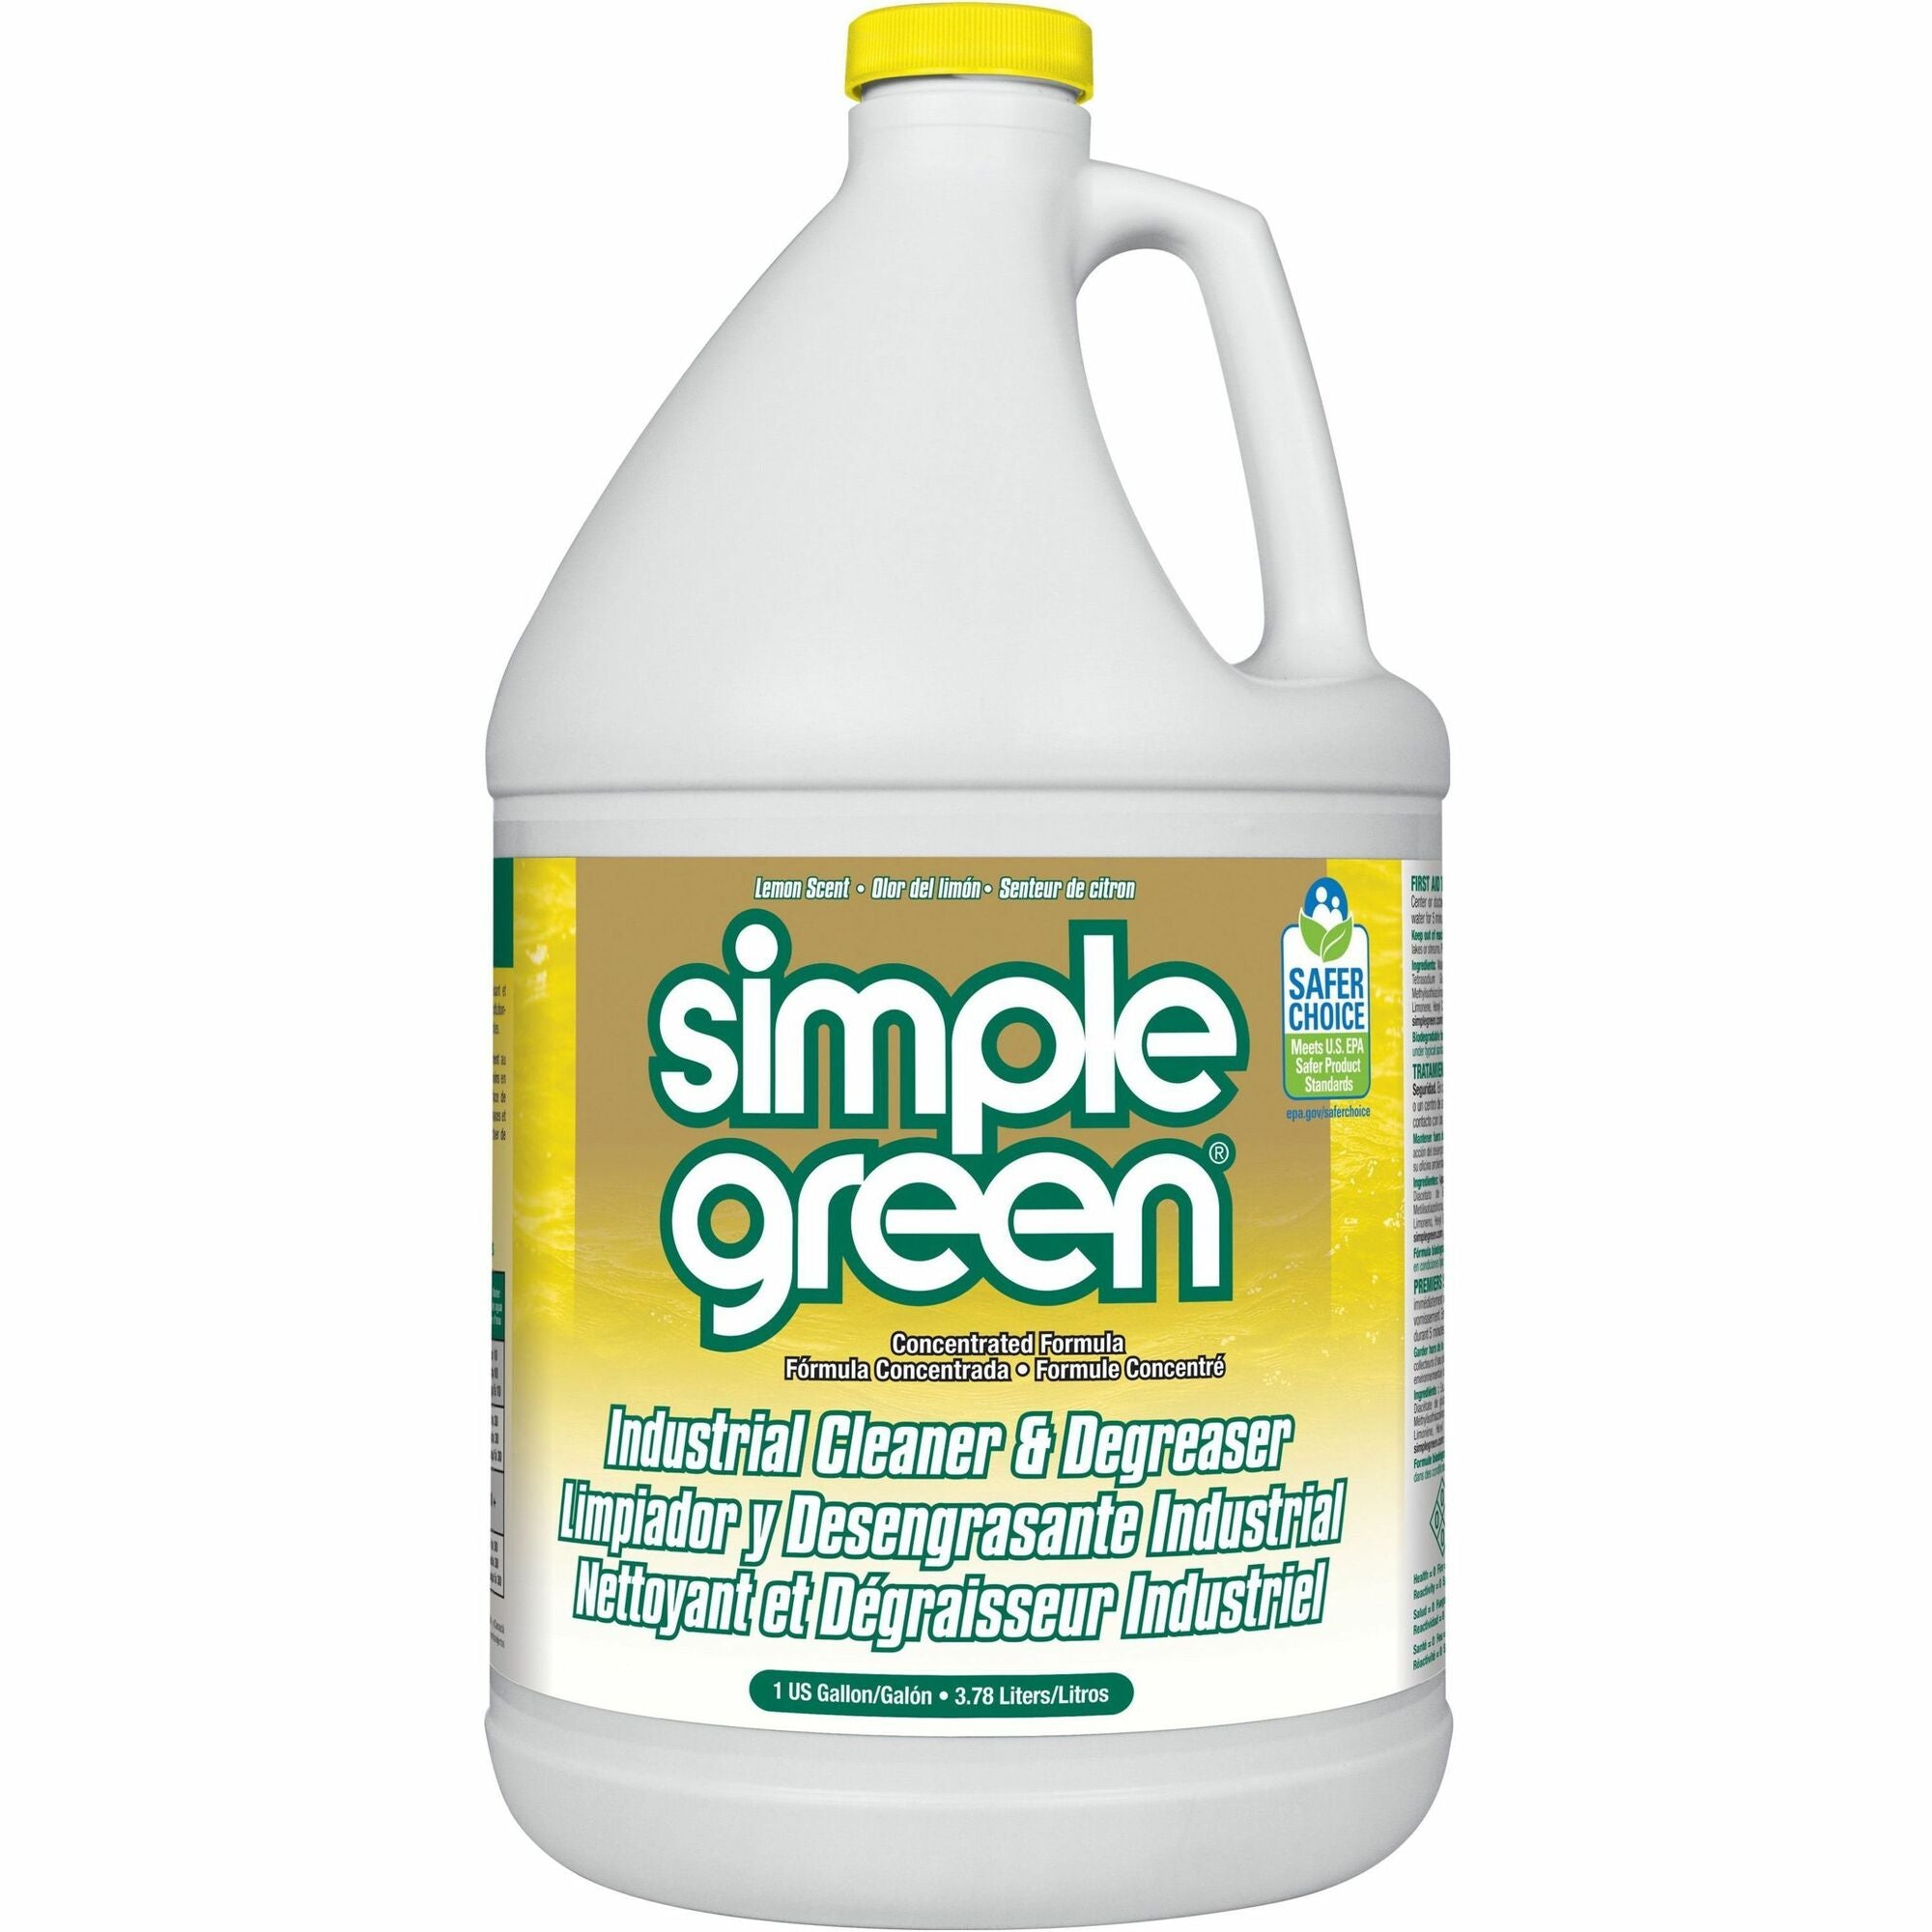 simple-green-industrial-cleaner-degreaser-concentrate-128-fl-oz-4-quart-lemon-scent-6-carton-non-toxic-voc-free-butyl-free-phosphate-free-non-abrasive-non-corrosive-deodorize-non-flammable-lemon_smp14010ct - 1